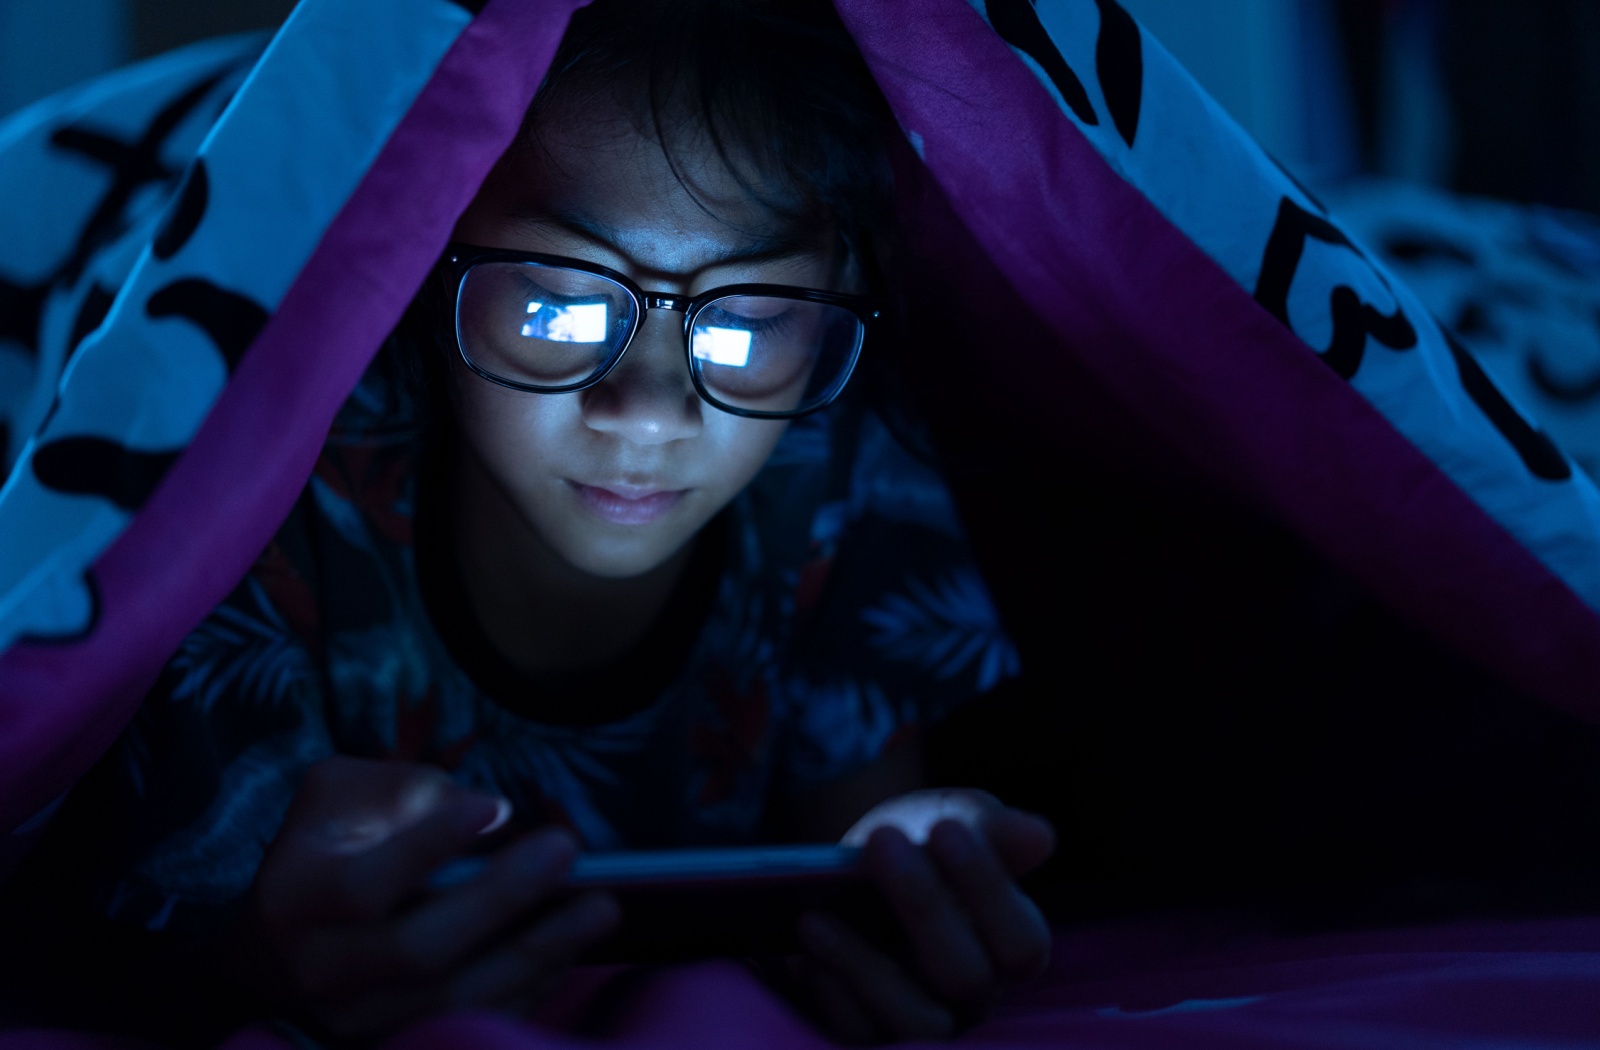 Young girl wearing blue light glasses while watching a video on her mobile phone in the dark.